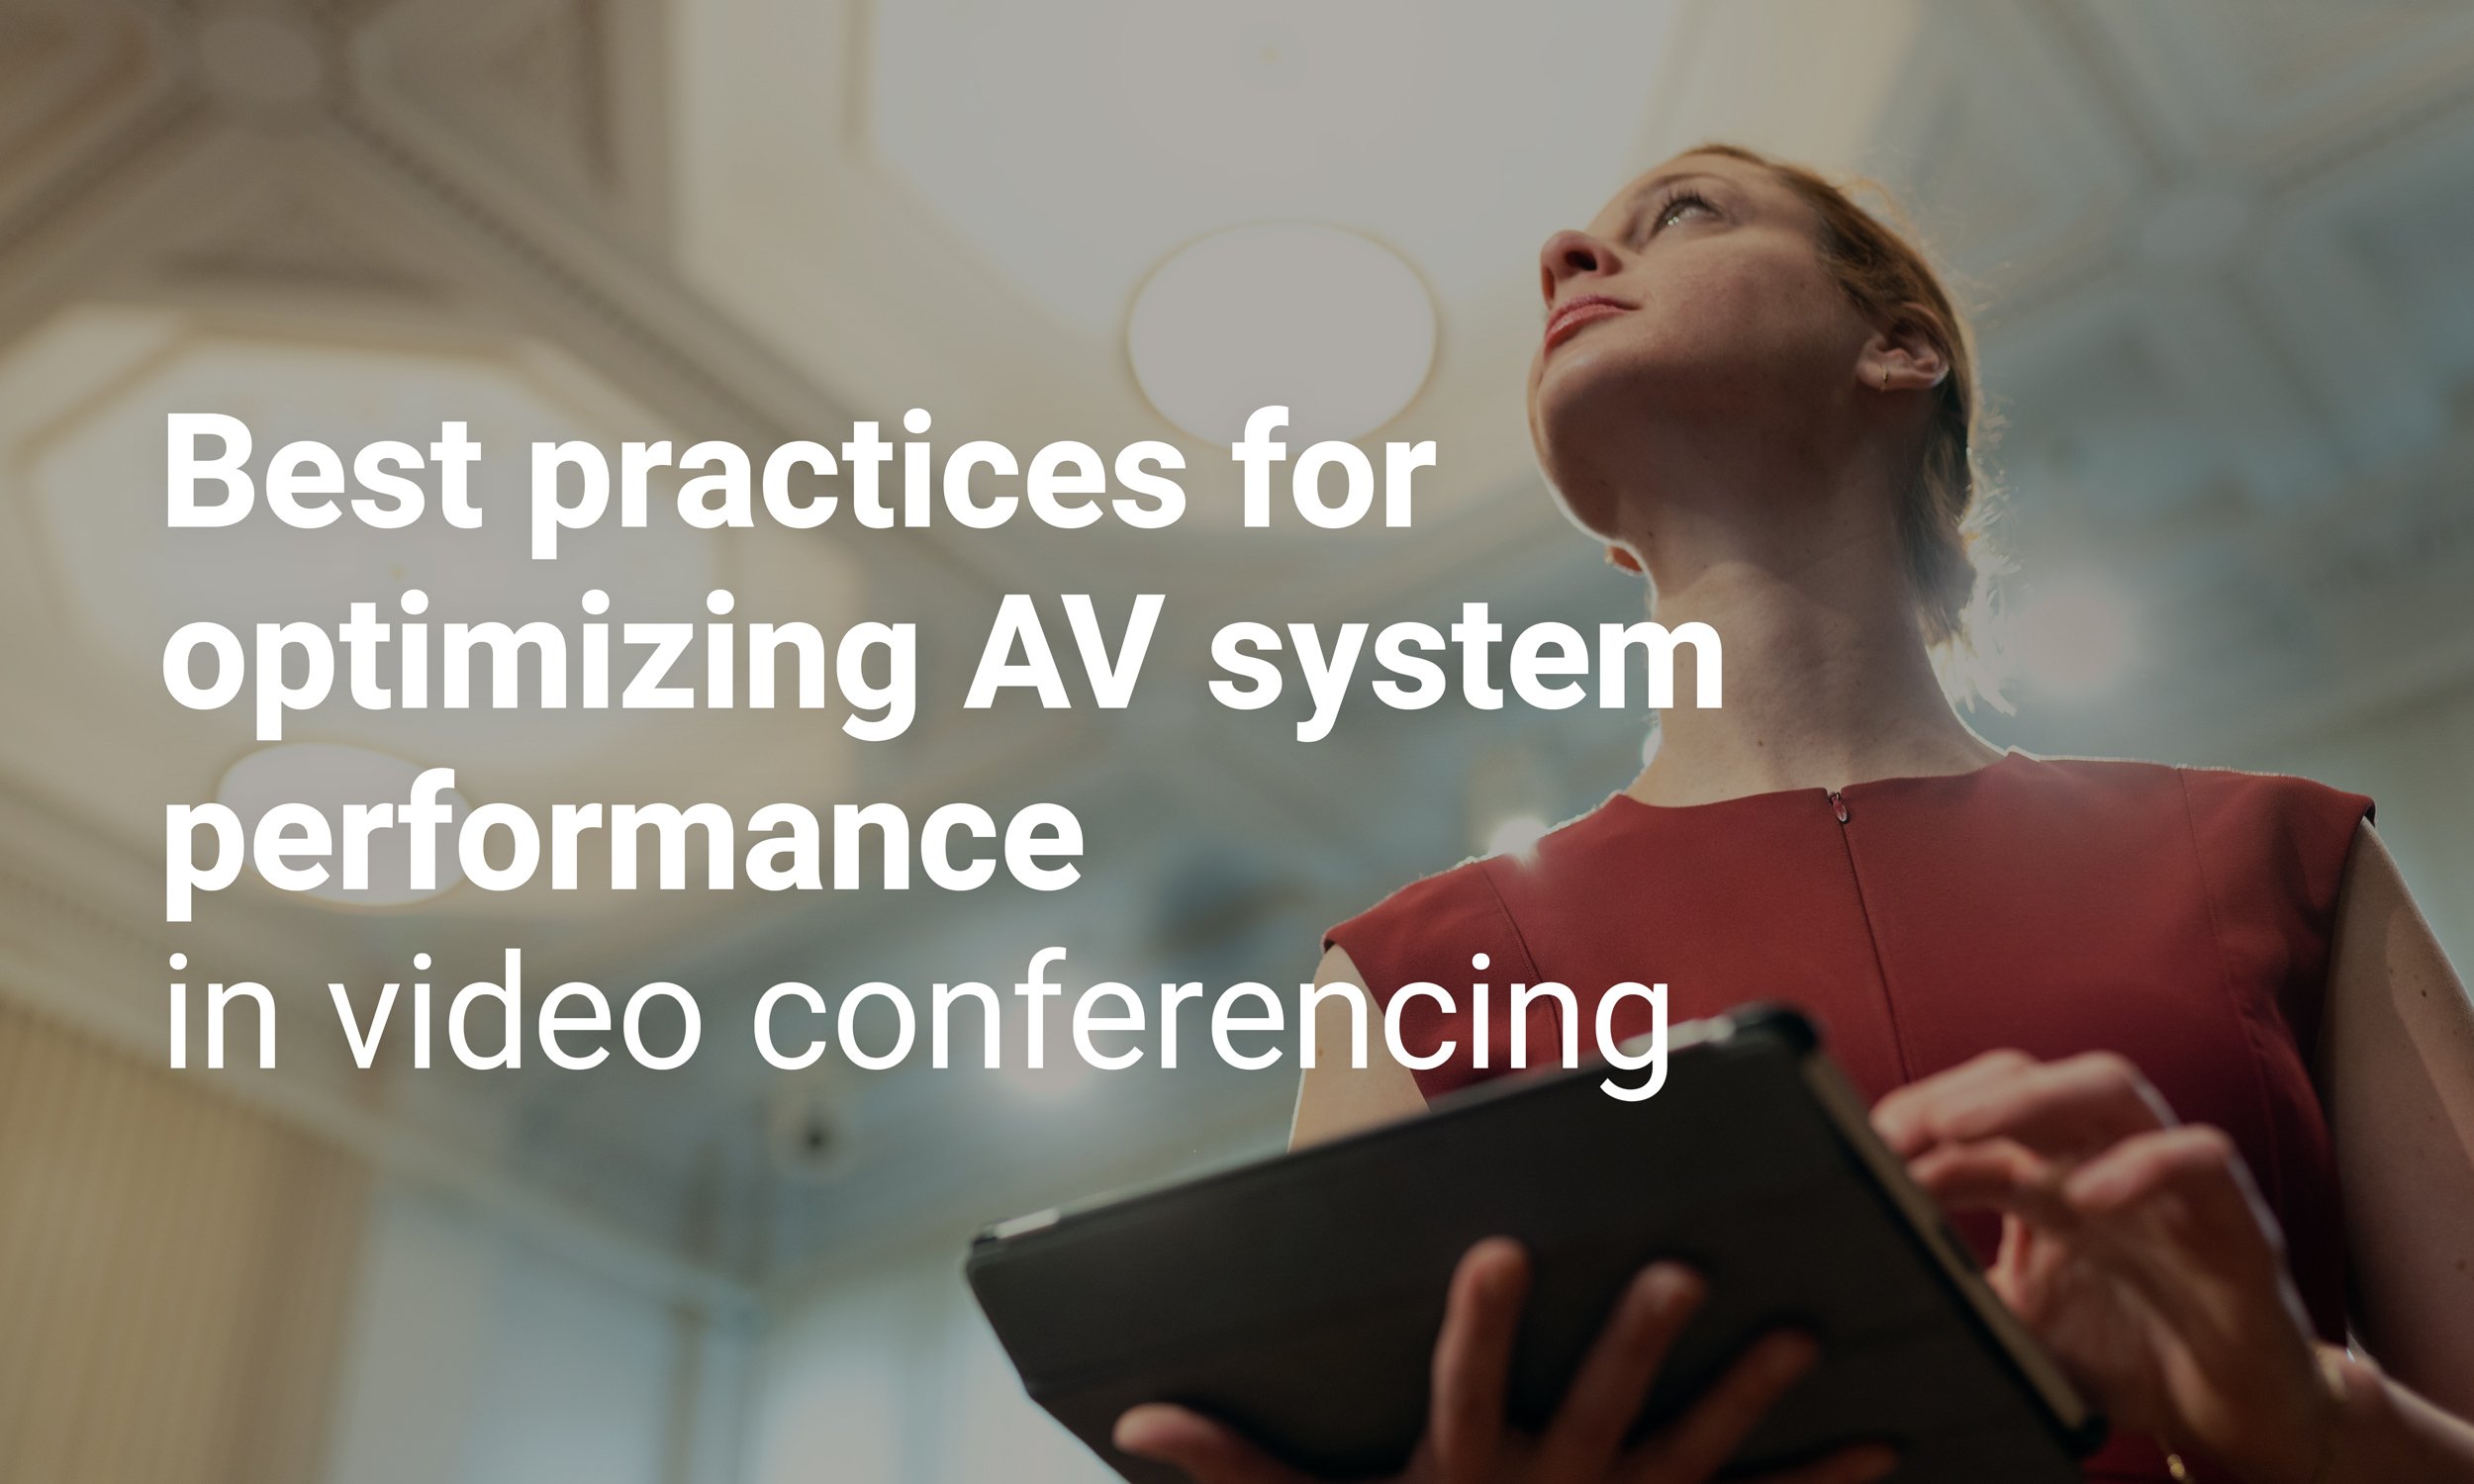 Best Practices for Optimizing AV System Performance in Video Conferencing